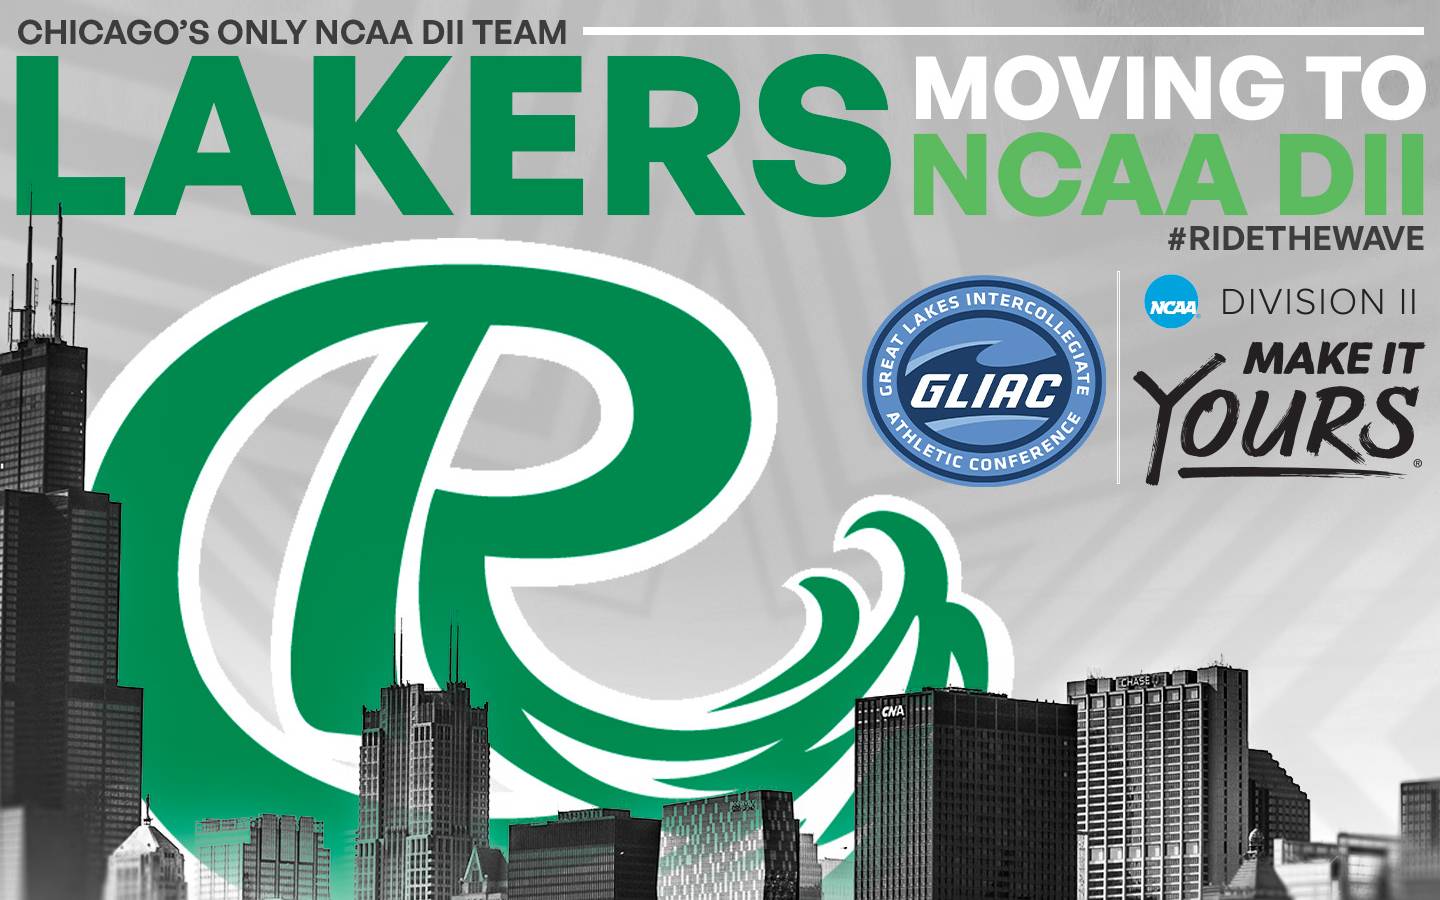 Infographic, Athletics, Lakers moving to NCAA DII #RideTheWave